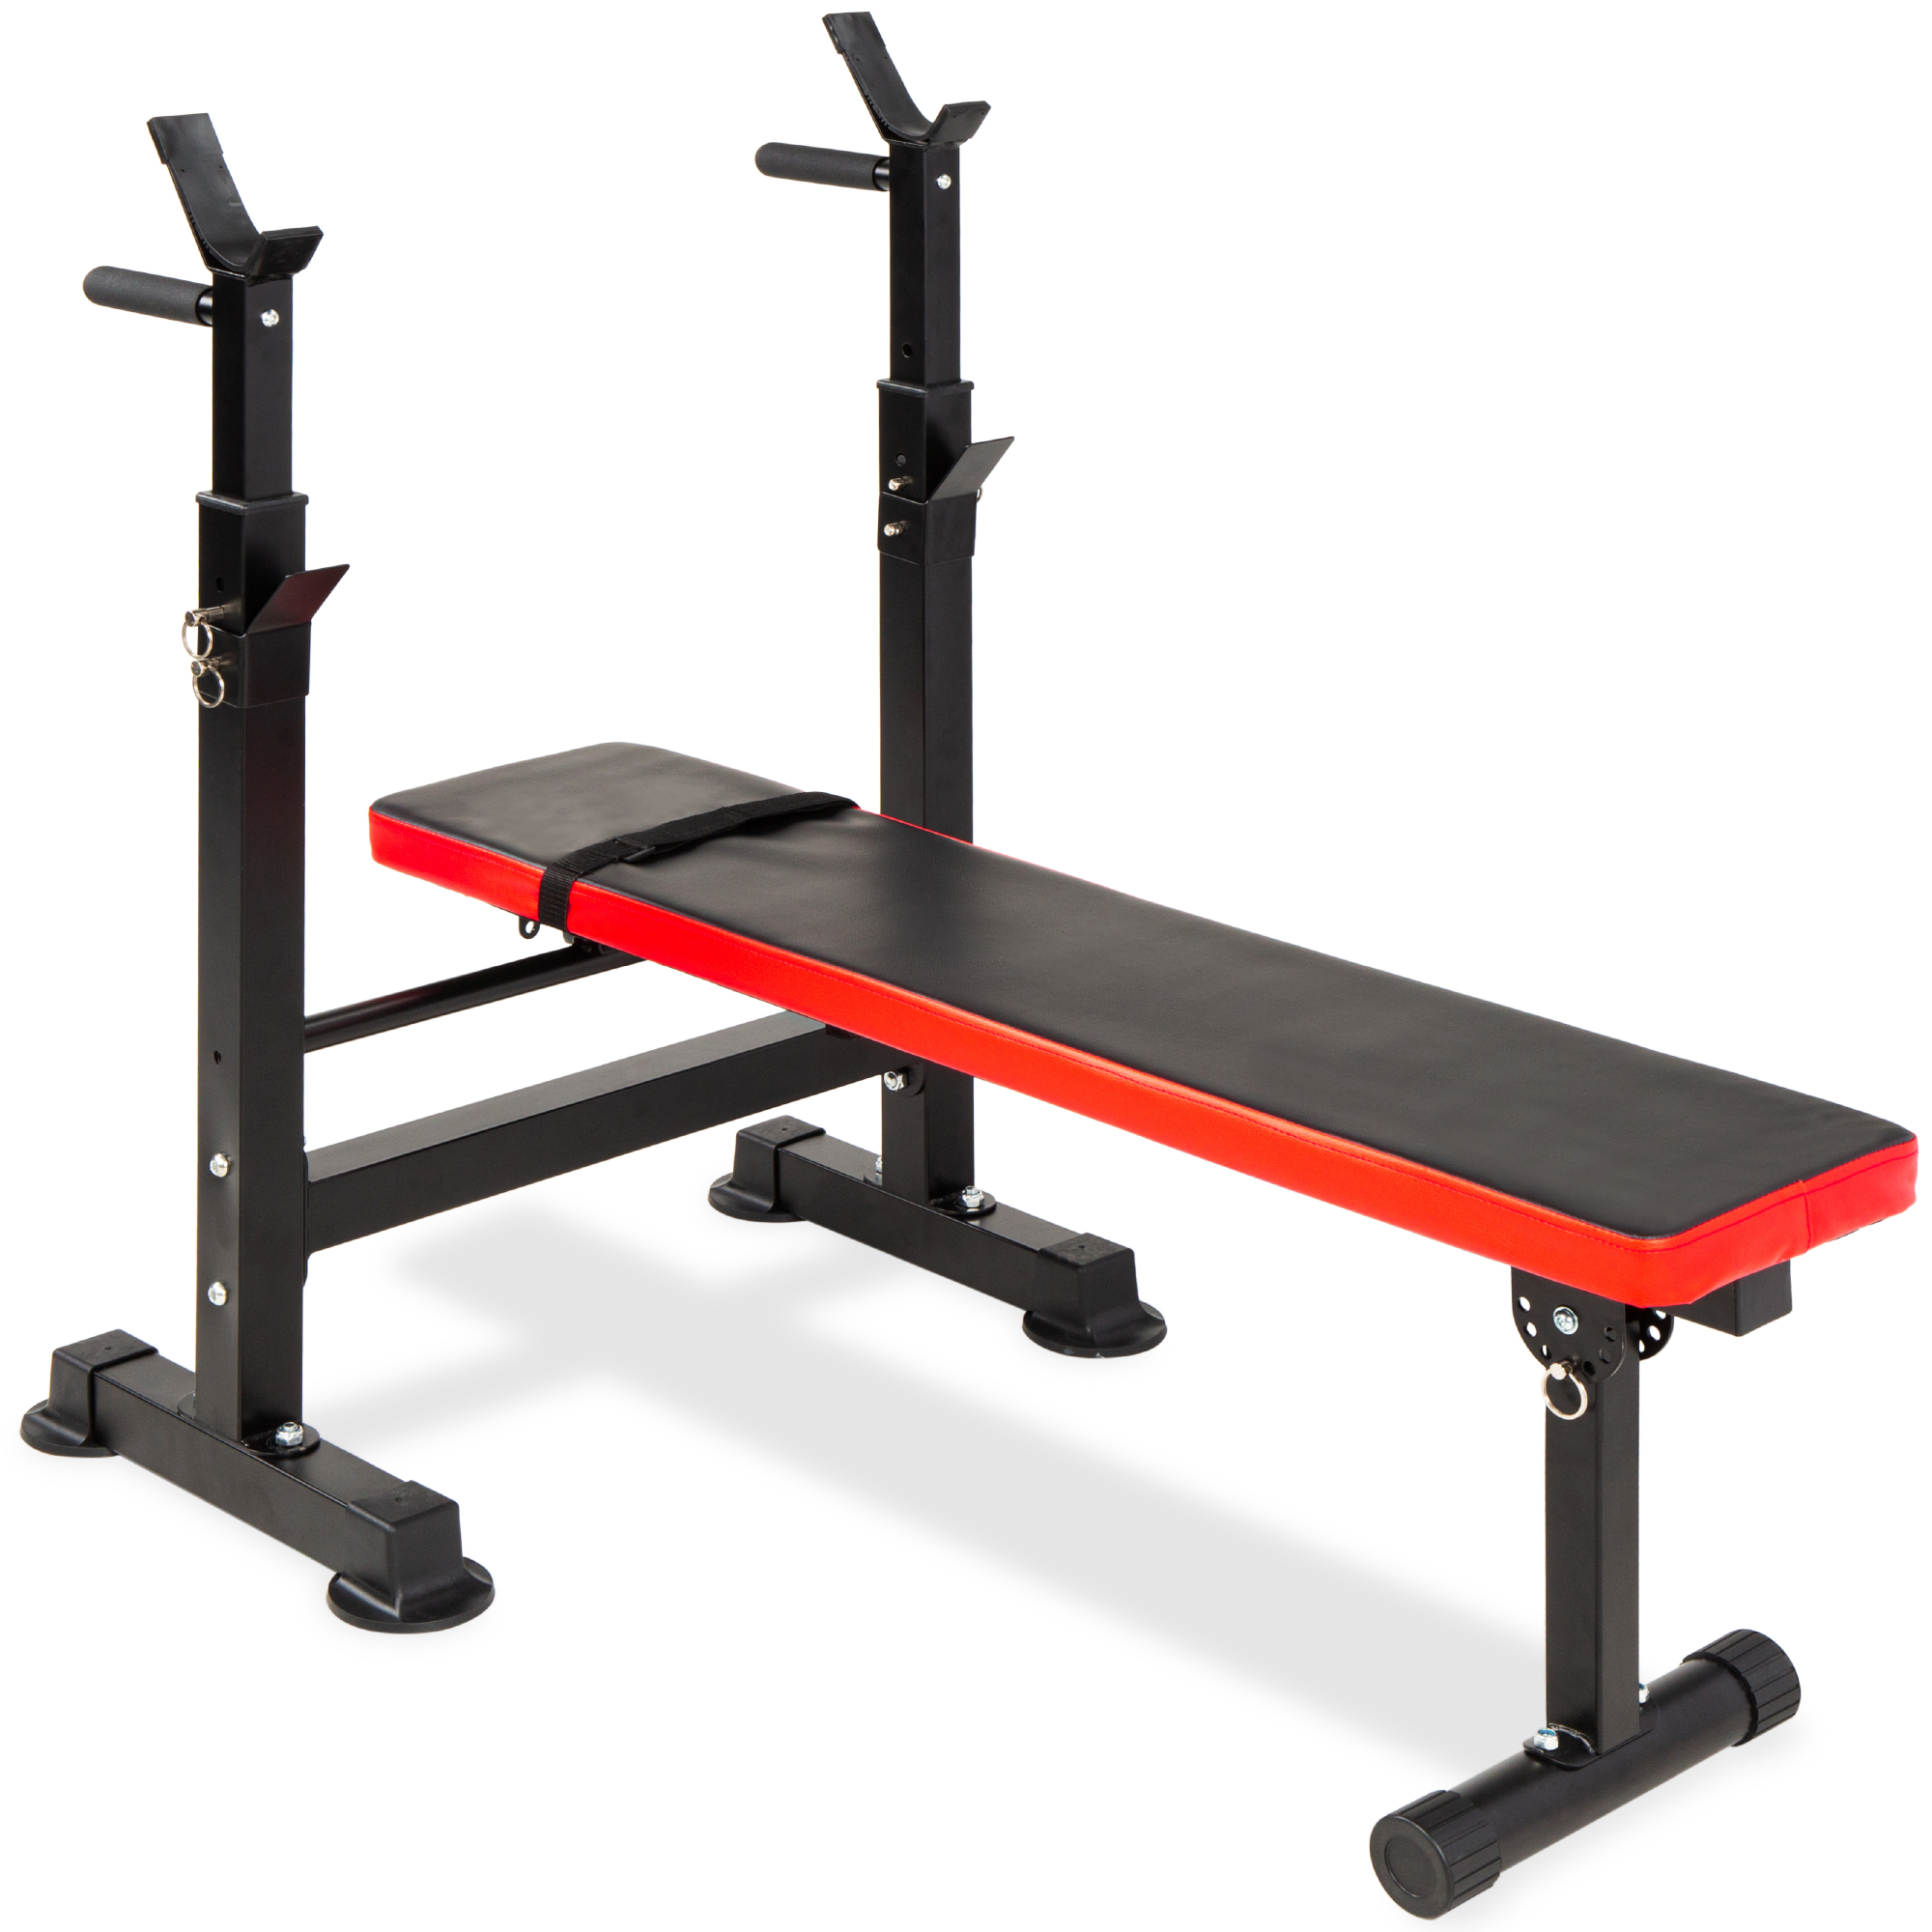 Best Choice Products Adjustable Folding Fitness Barbell Rack & Weight Bench for Home Gym, Strength Training - Black/Red - image 1 of 6